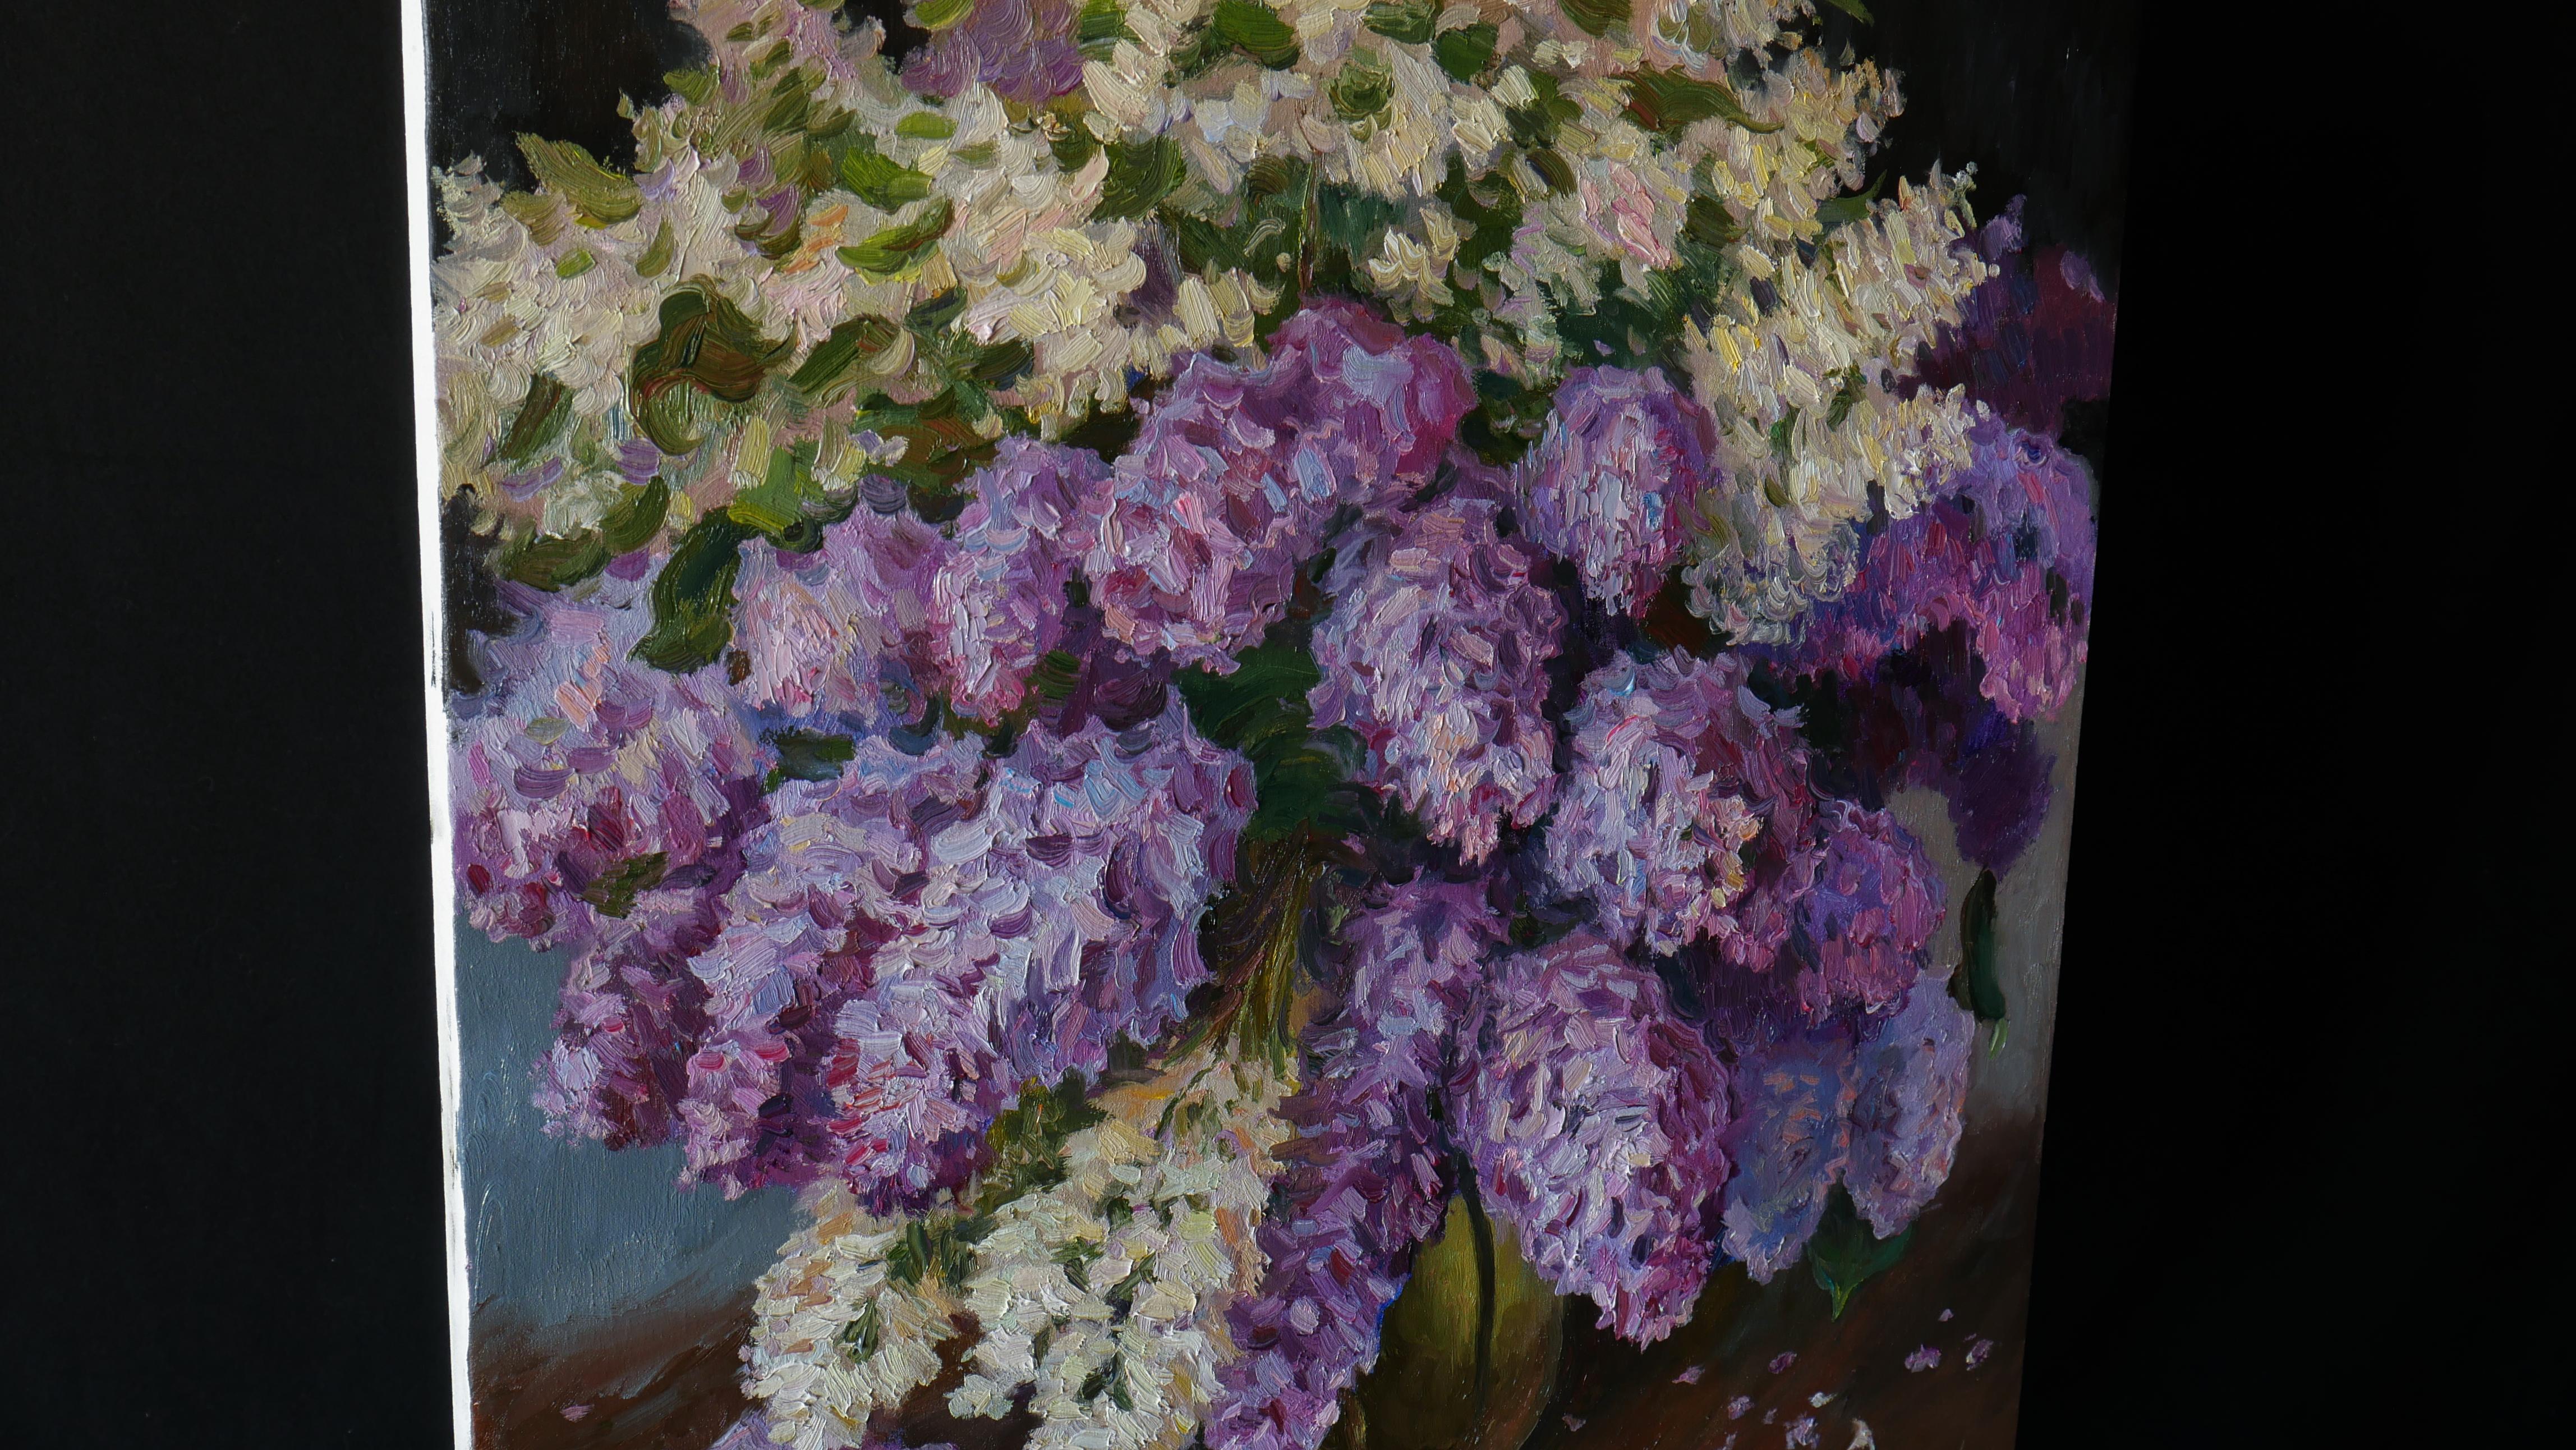 The Bouquet Of Aromatic Lilacs - lilacs still life painting - Impressionist Painting by Nikolay Dmitriev